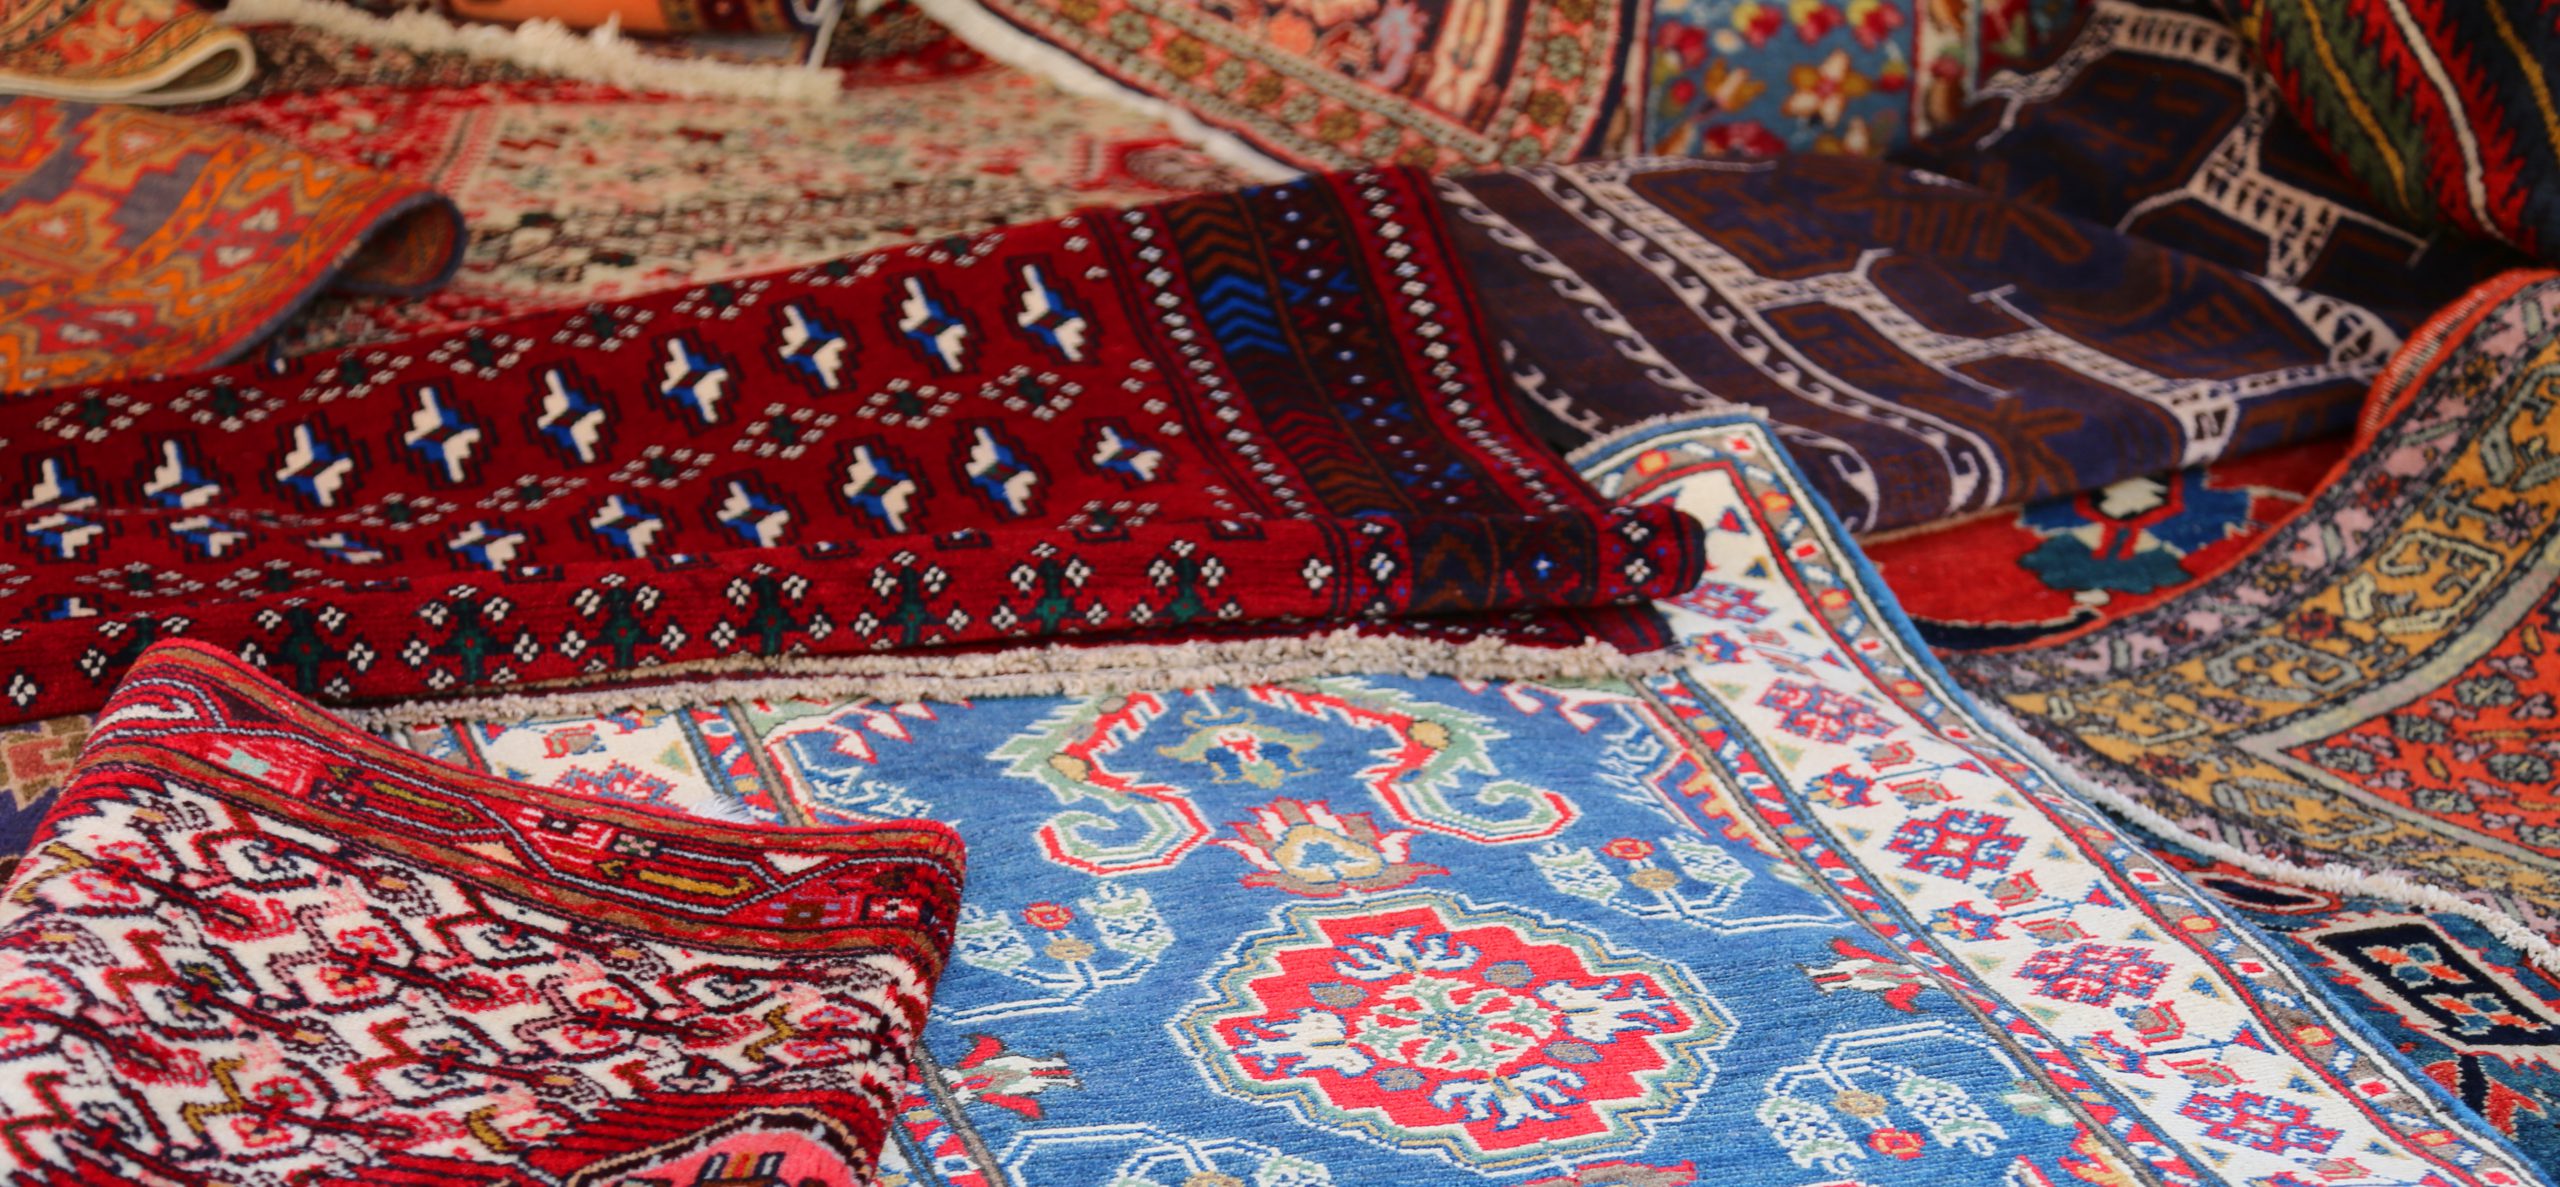 Rug Cleaning Of Persian And Oriental Rugs